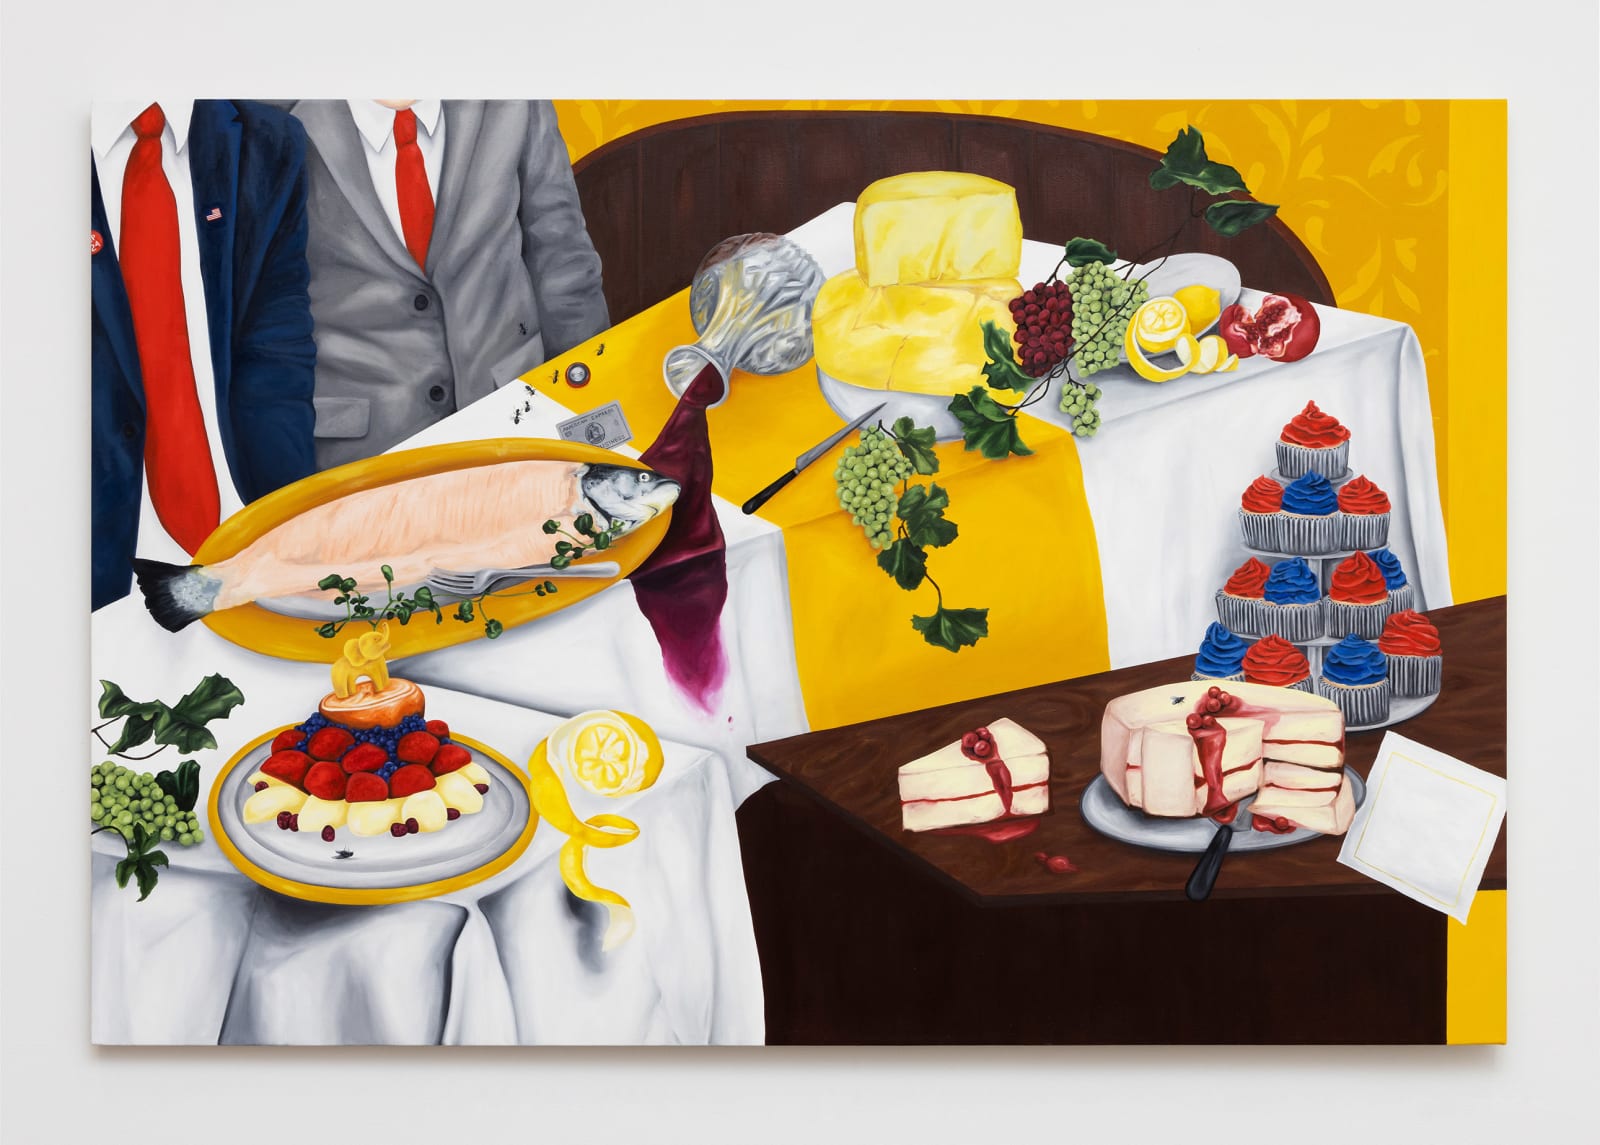 Painting of two politicians sitting next to tables serving skinned fish, wine, desserts, cheese, grapes, and fruit plate with golden elephant ornament surrounded by ants and flies.